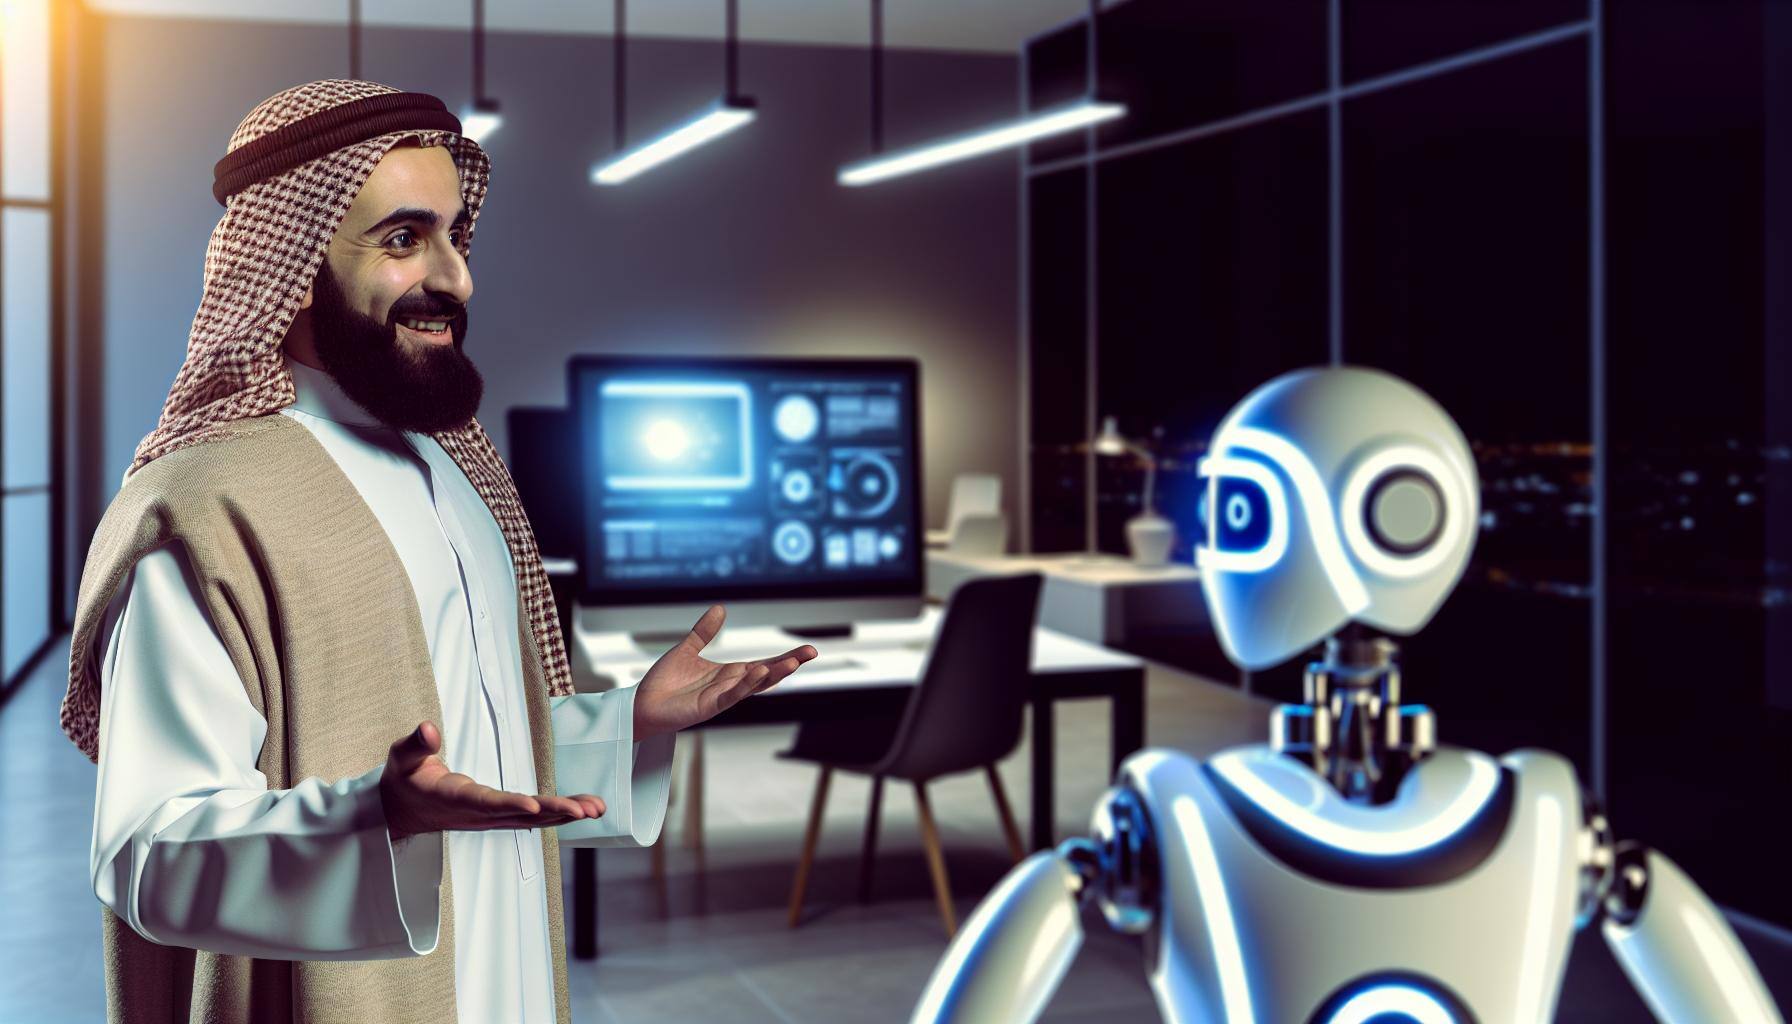 size64 content a person with beard is interacting with a robot and theres a computer on the side